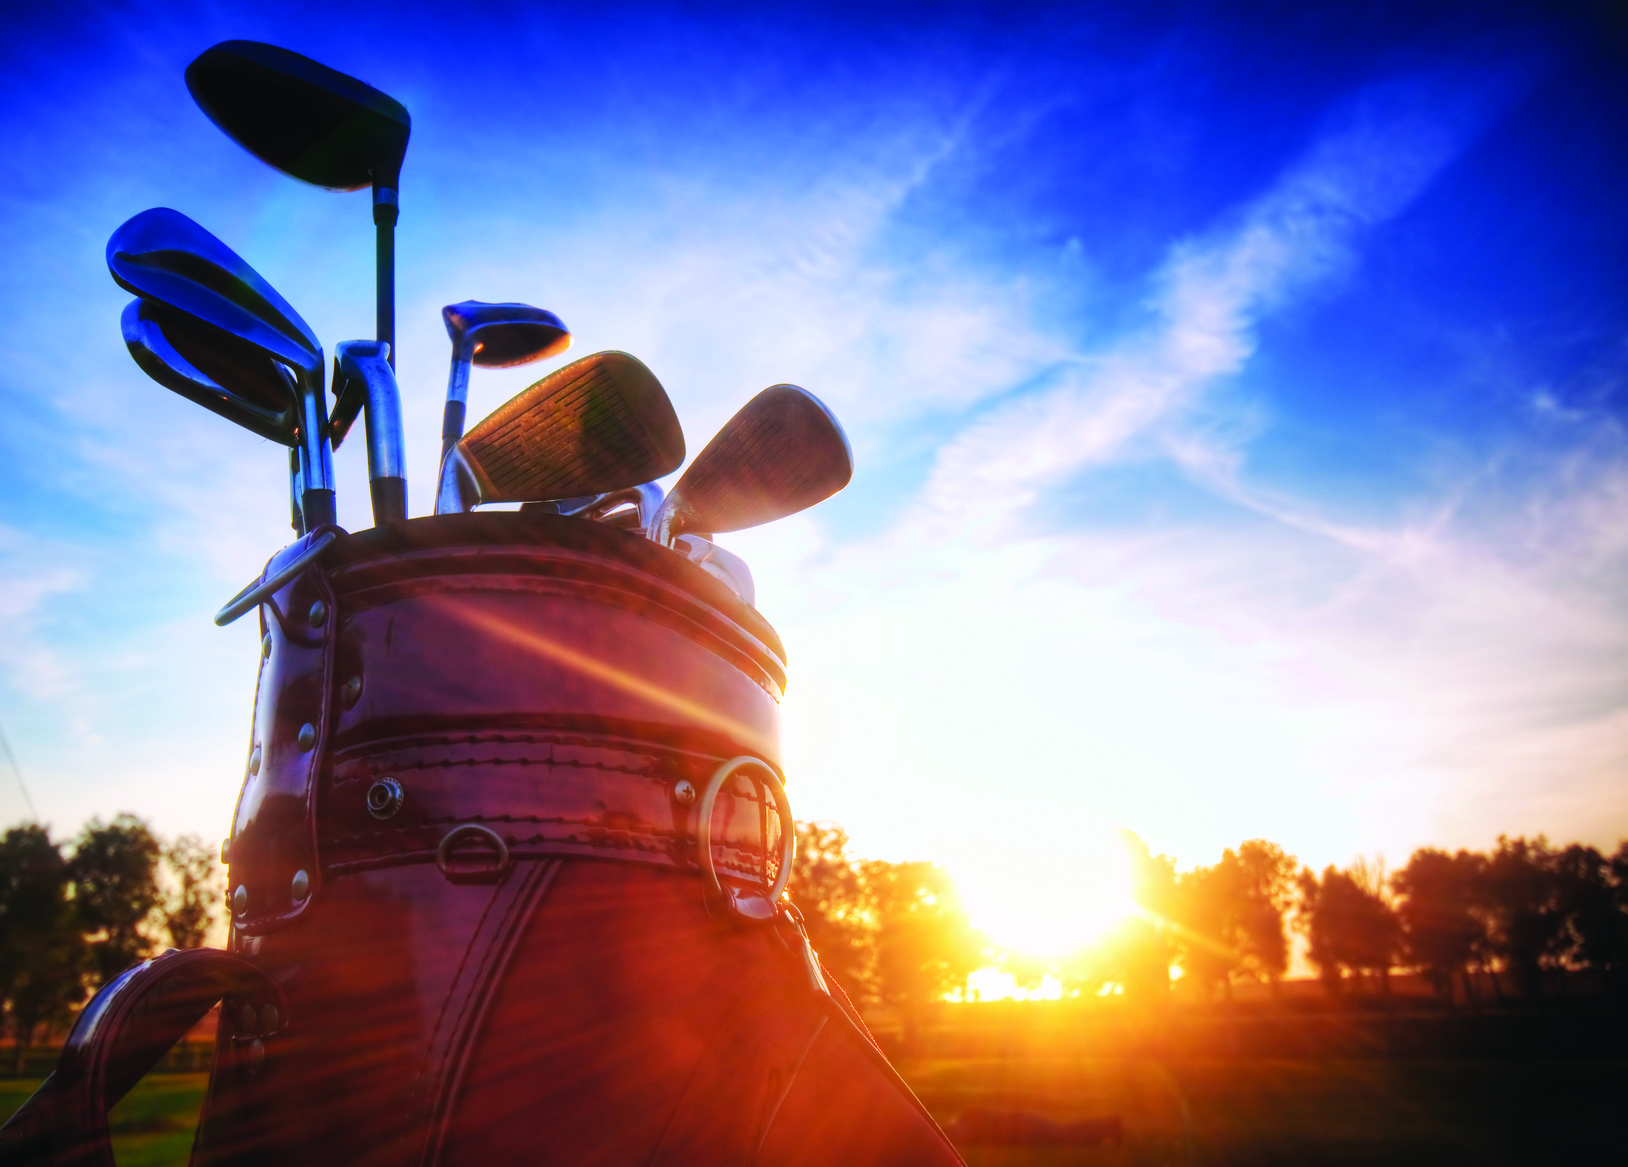 Professional golf gear on the golf field at sunset.